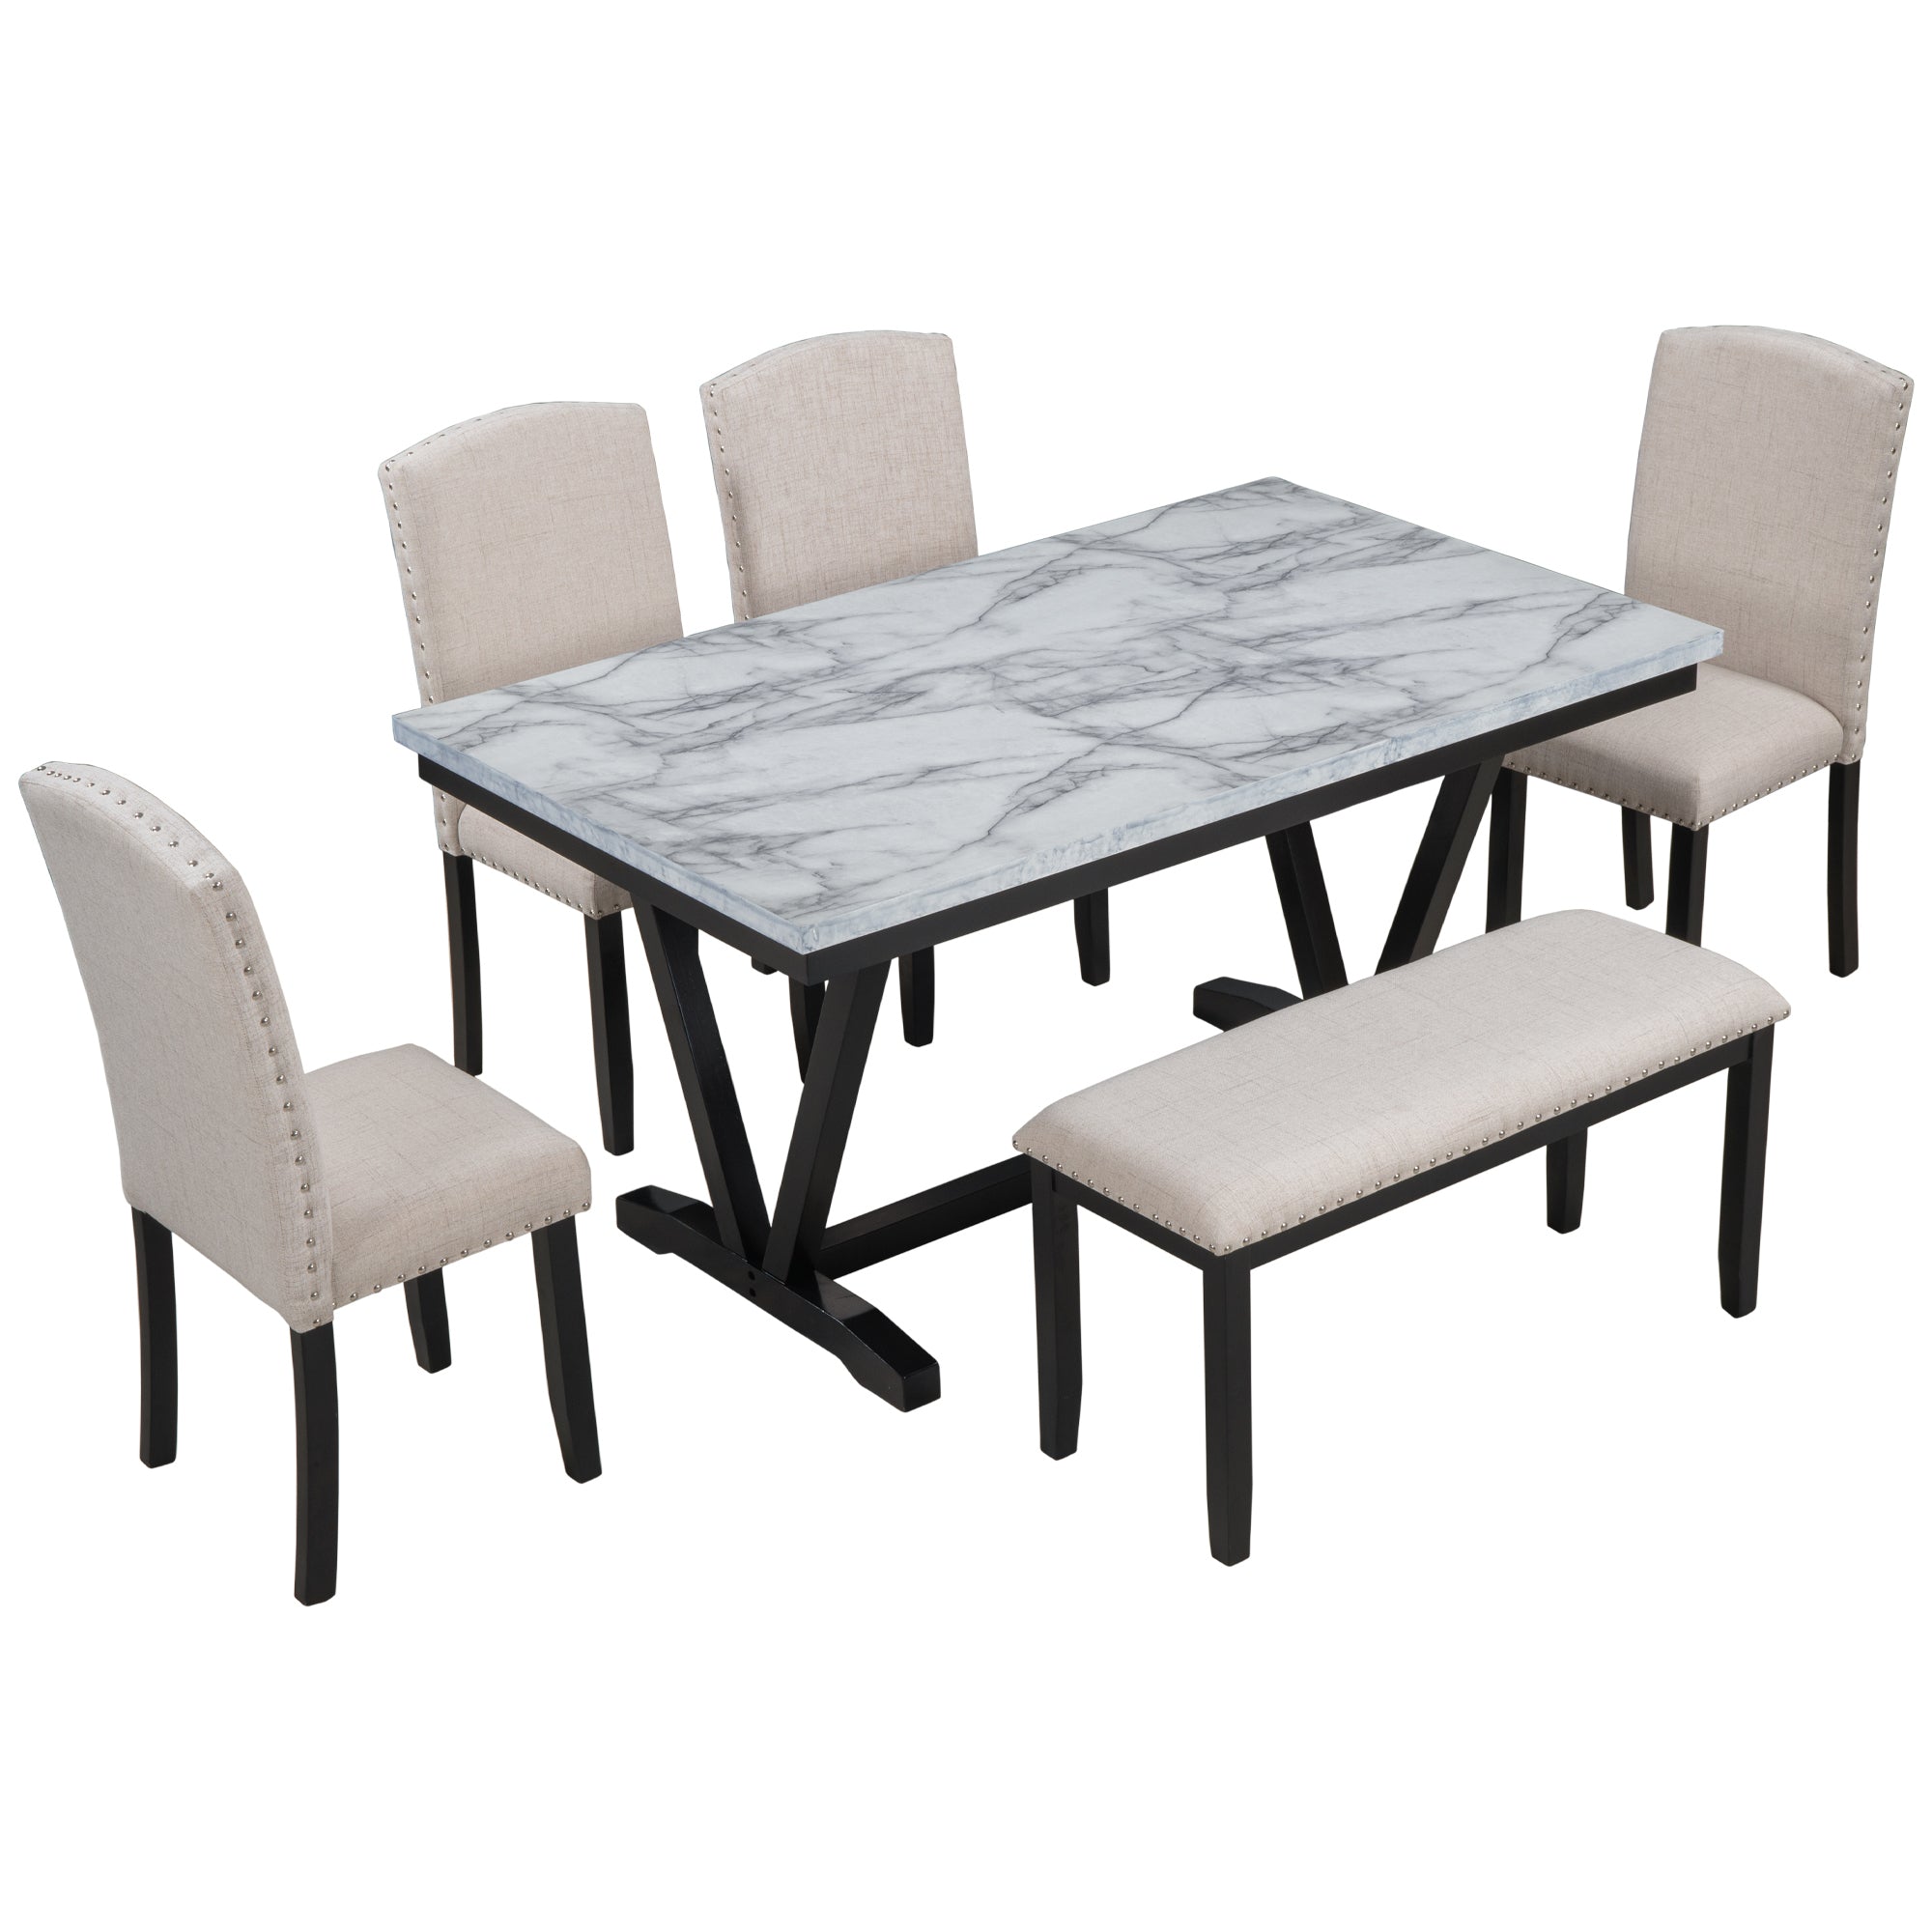 TREXM 6-piece Dining Table with 4 Chairs and 1 Bench, Table with Marble Veneer Top and V-shaped Legs (white)